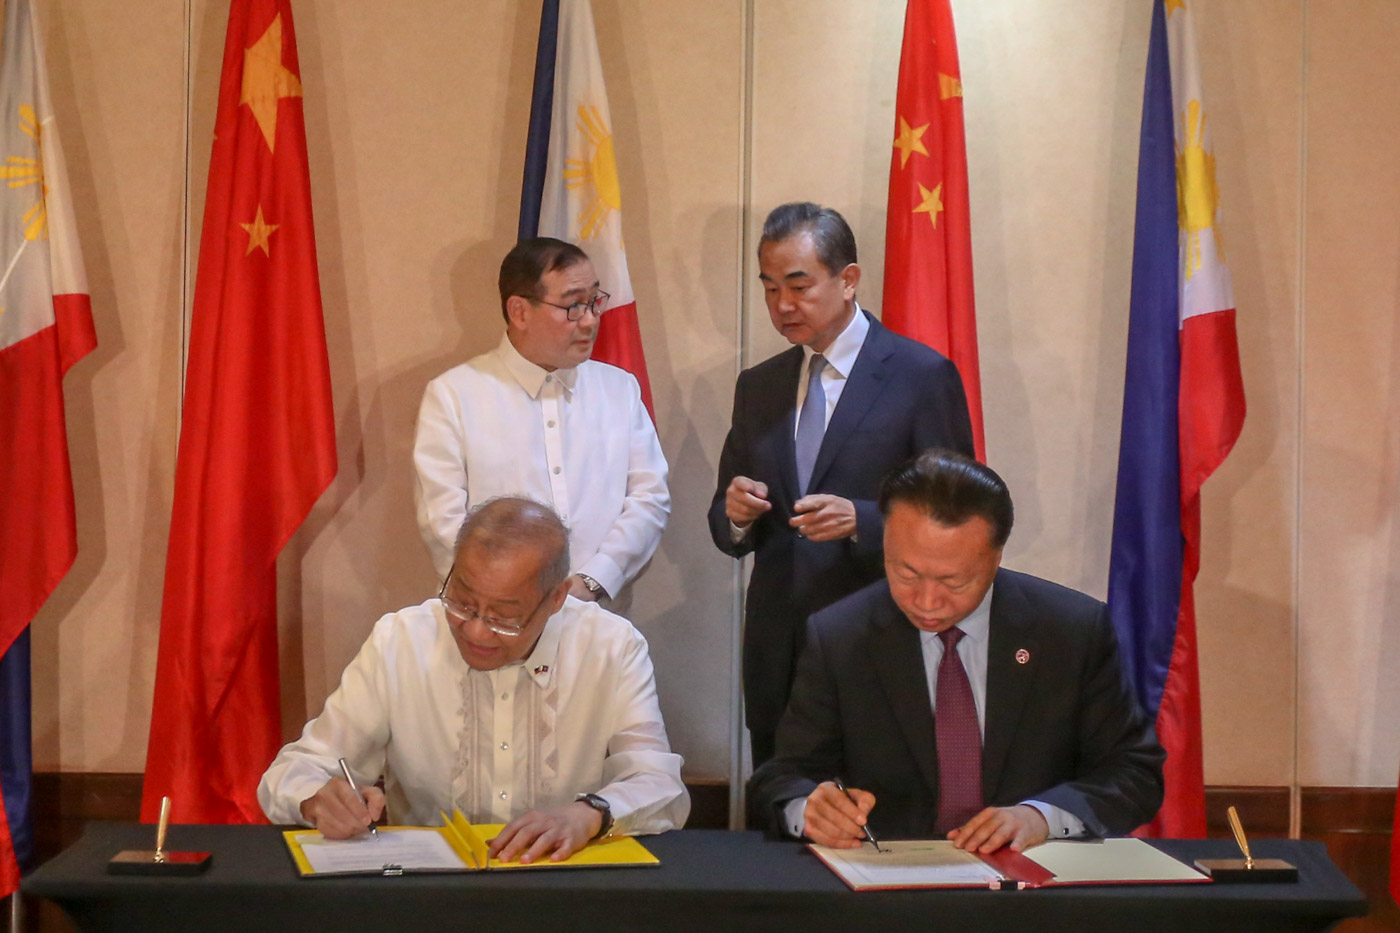 SIGNING OF AGREEMENTS. Philippine Foreign Secretary Teodoro 'Teddyboy' Locsin Jr and Chinese Foreign Minister Wang Yi witness the signing of agreements between the Philippines and China, represented by Philippine Ambassador Jose Santiago 'Chito' Santa Romana and Chinese Ambassador Zhao Jianhua on October 29, 2018. Photo by Manman Dejeto/Rappler 